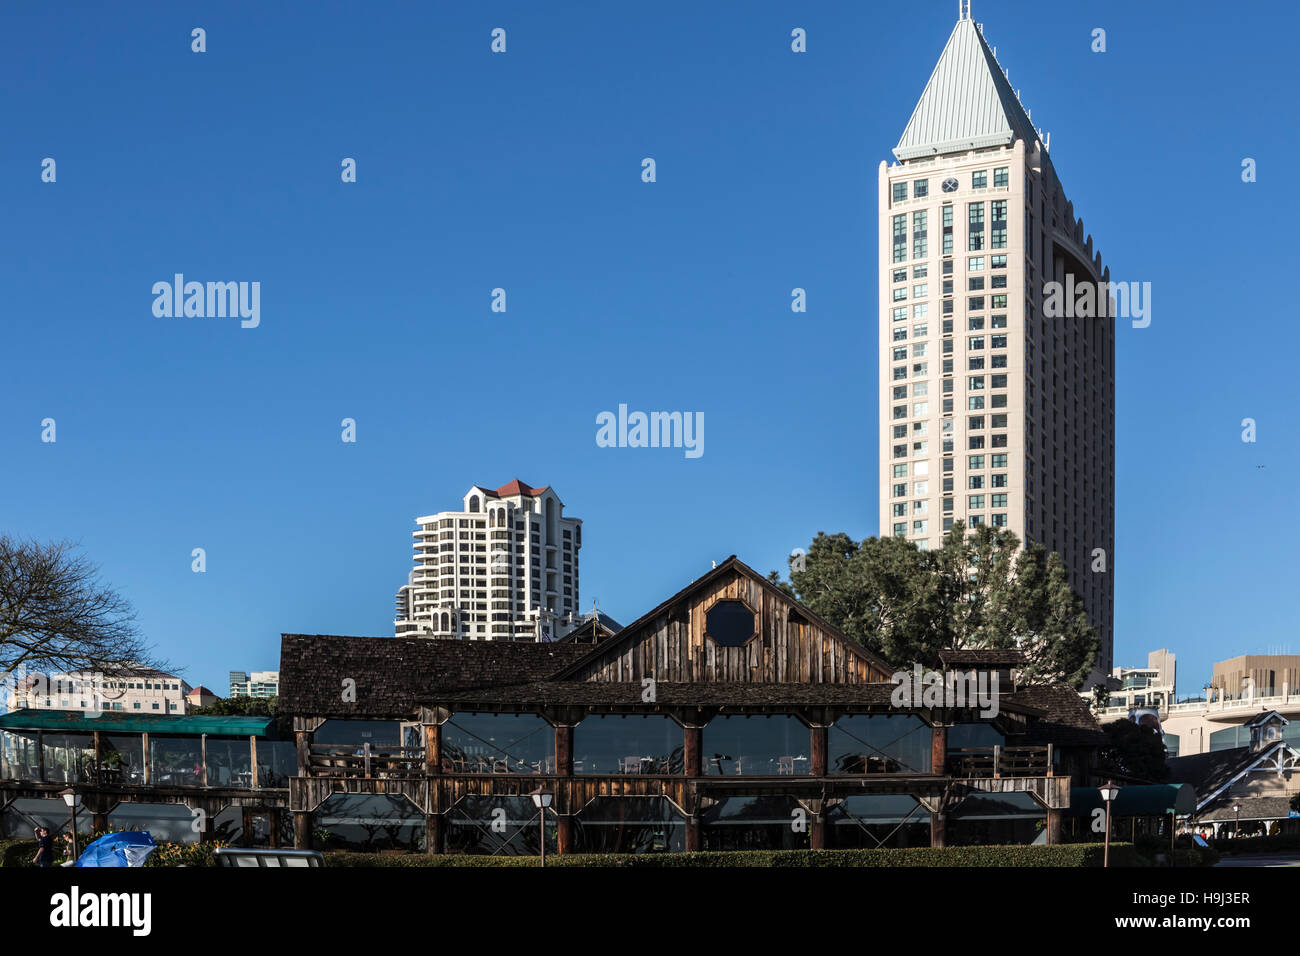 historic harbor house restaurant on san diego bay with hotels in distance Stock Photo